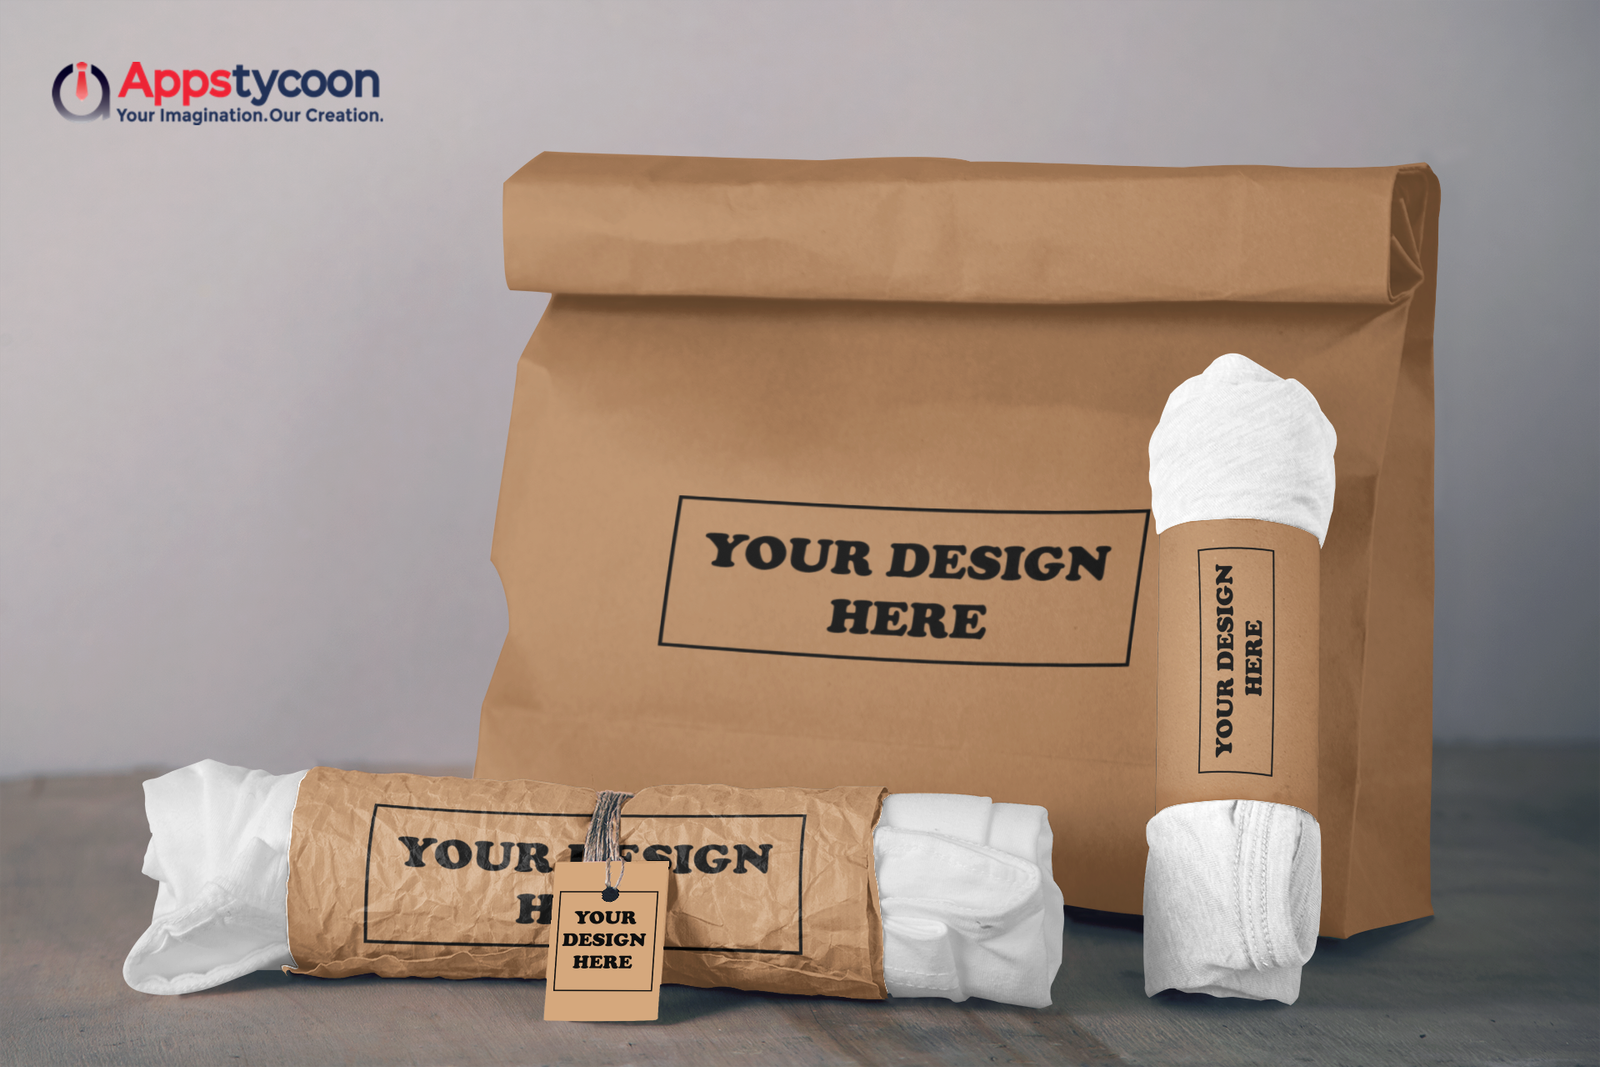 t shirt packaging mockup featuring a paper bag and a brand tag 4027 el1 Appstycoon